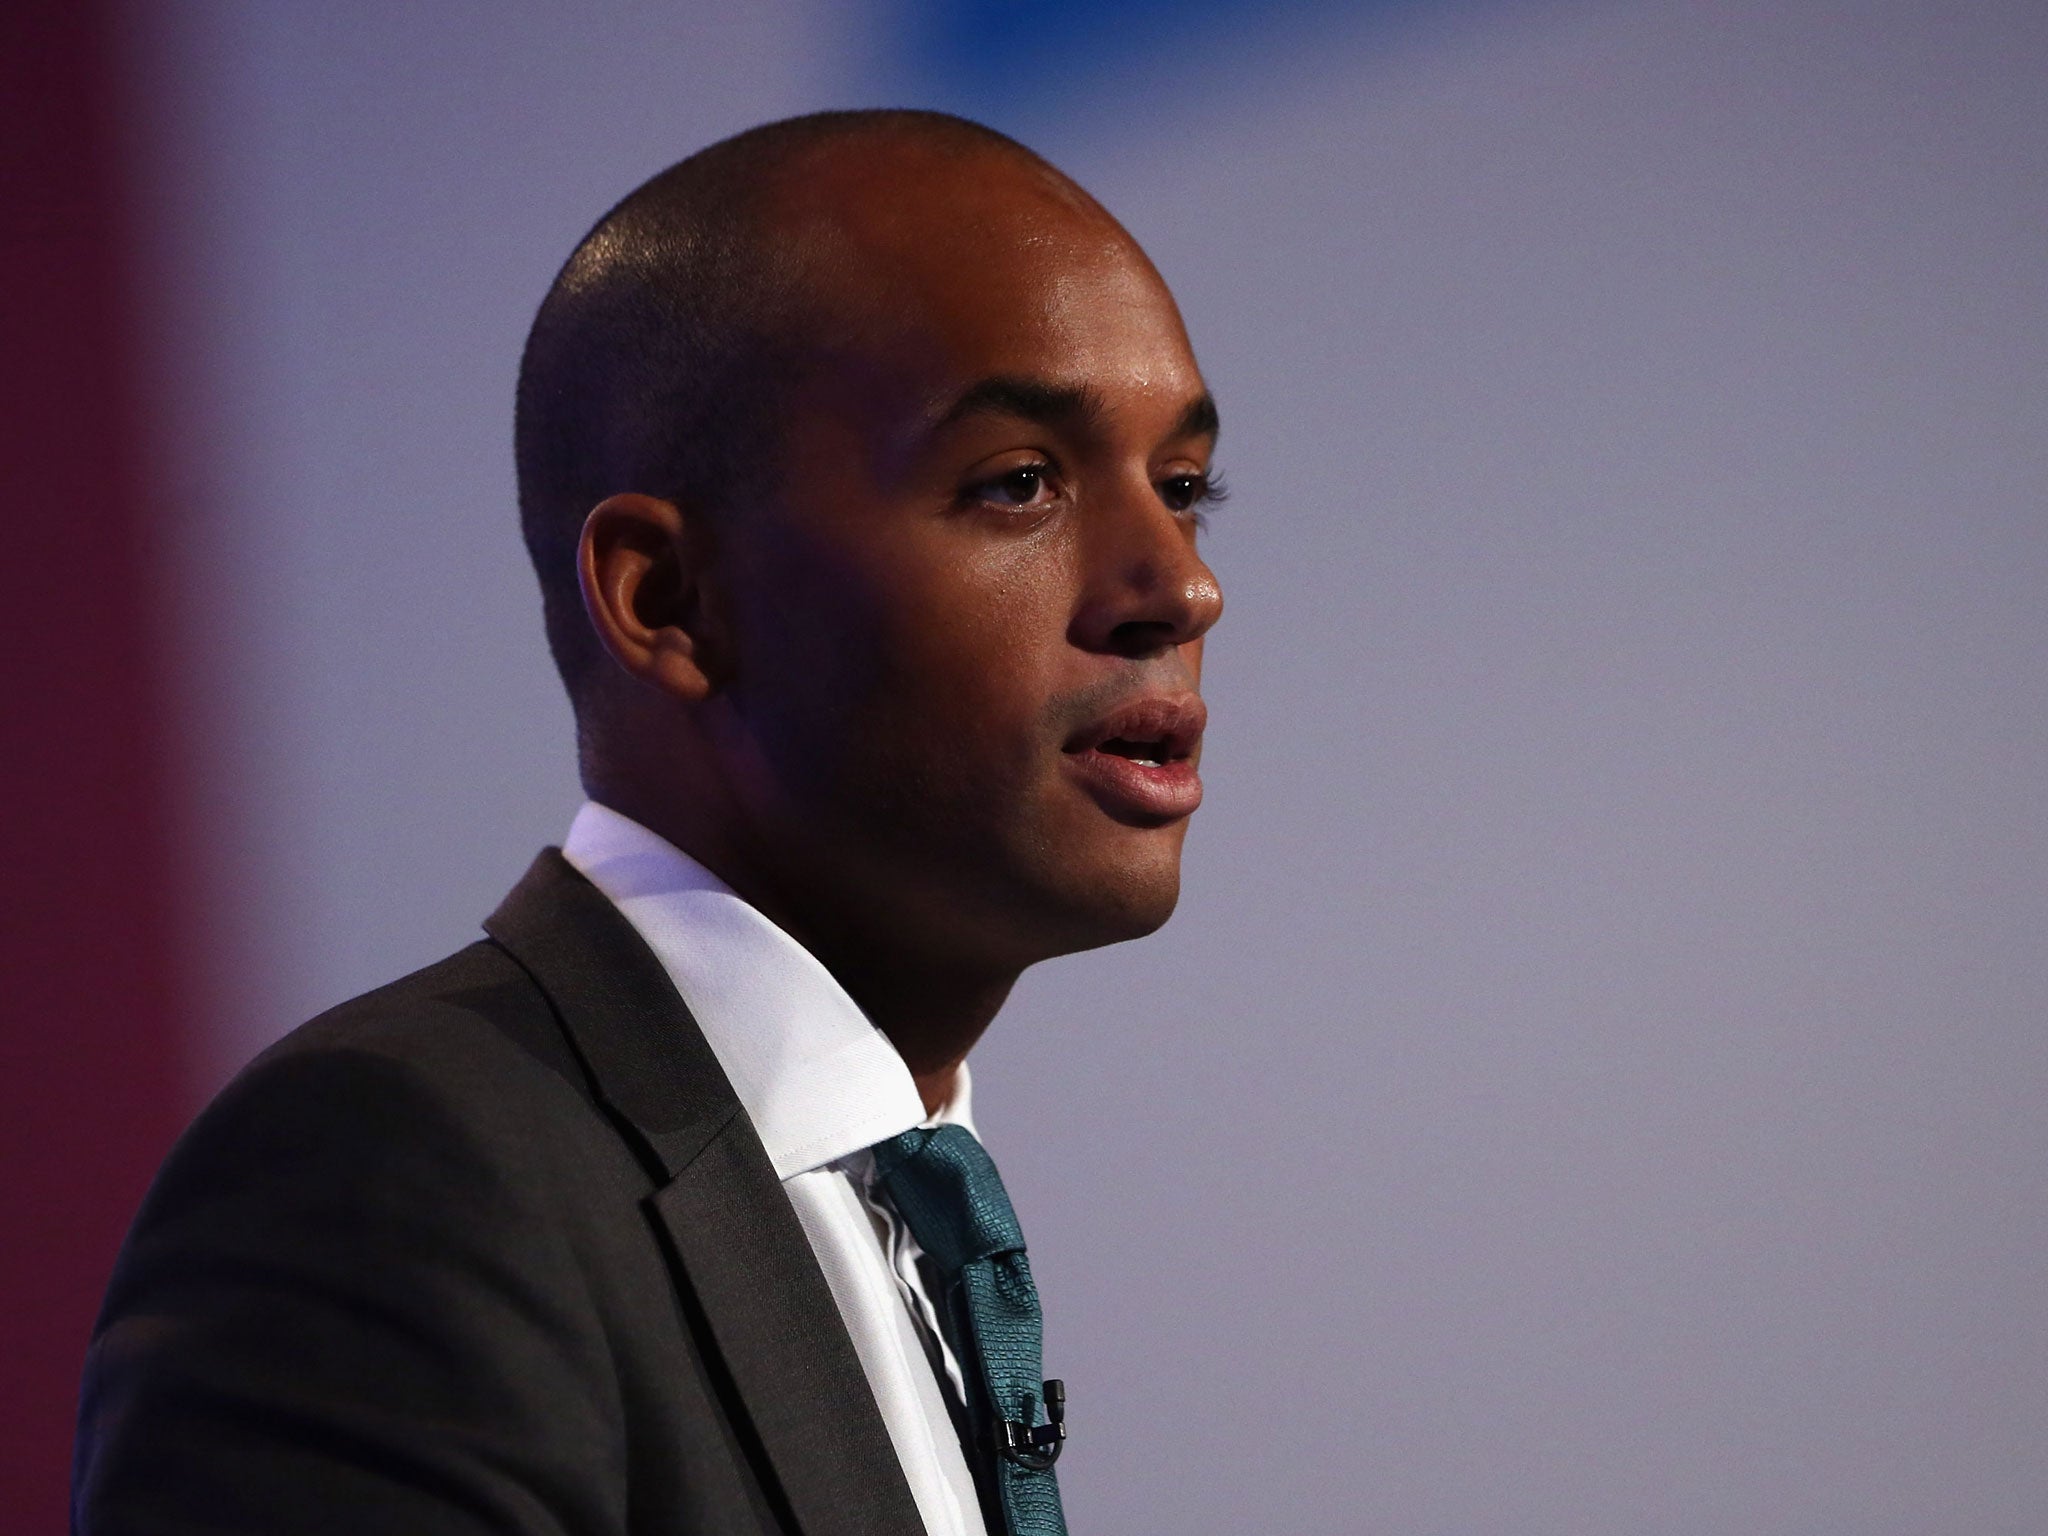 Chuka Umunna MP speaks to delegates at the Labour Party Conference at Manchester Central on October 1, 2012 in Manchester, England.